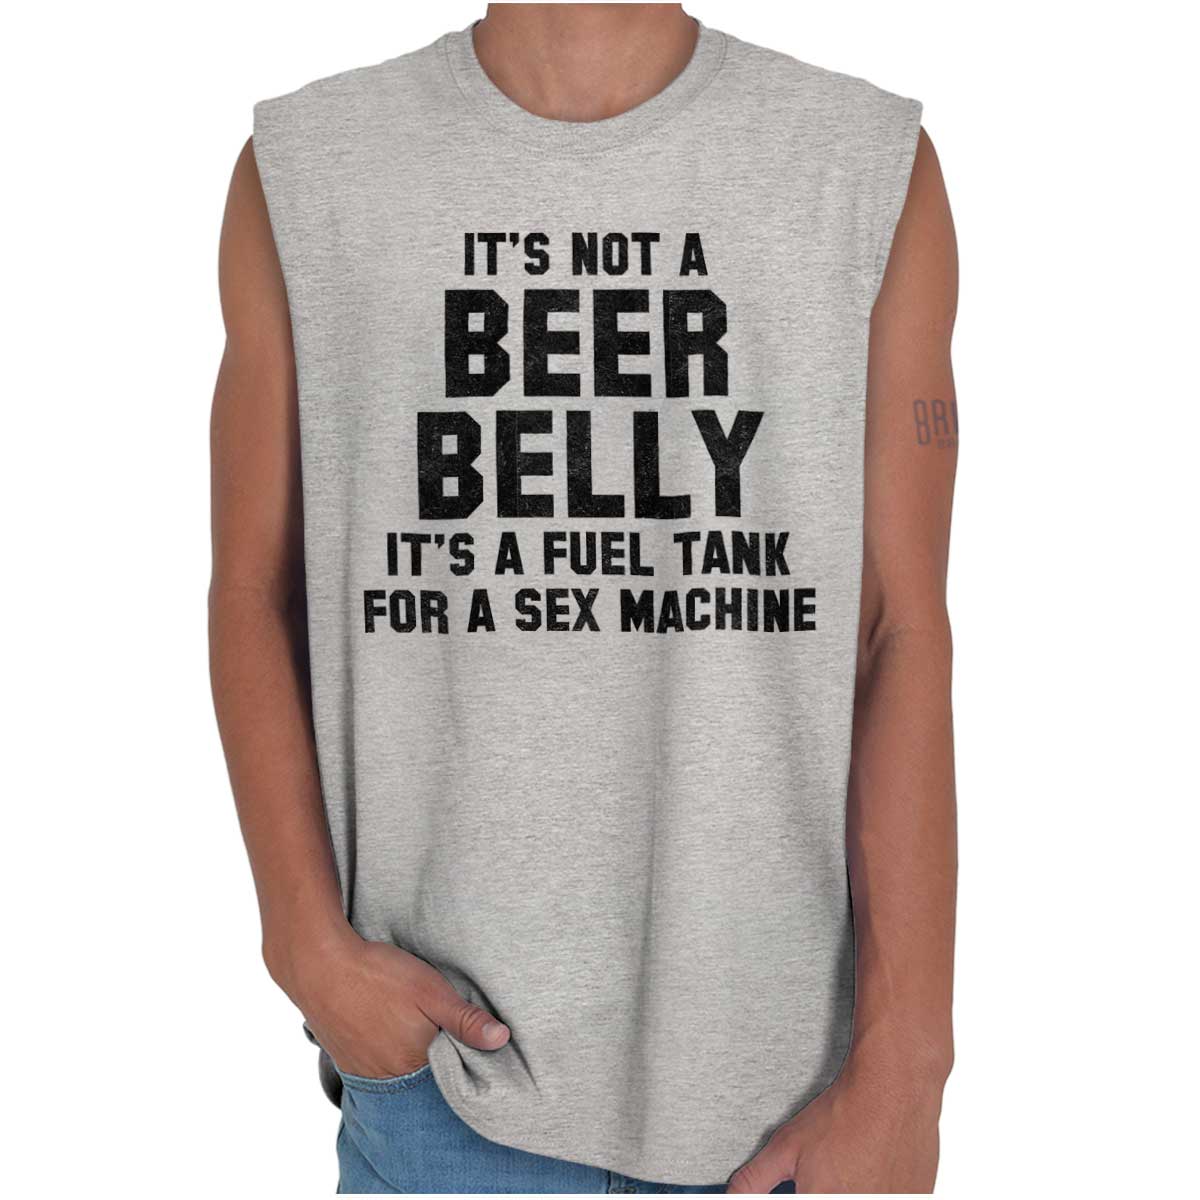 Not Beer Belly Fuel Tank Sex Machine Funny Shirt Cool T Sleeveless T